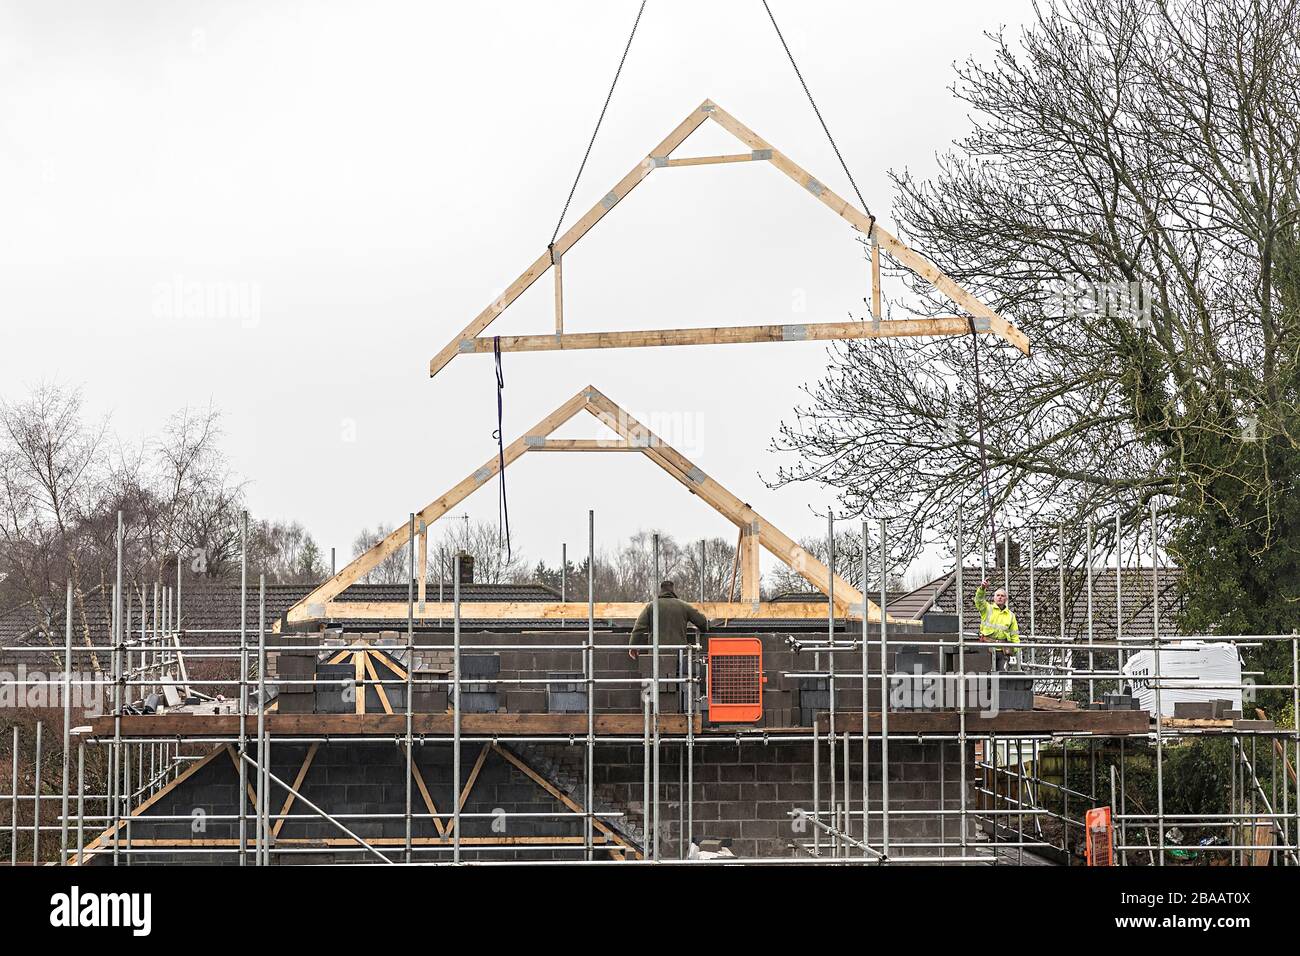 Lowering roof trusses while building new houses, Llanfoist, Wales, UK Stock Photo